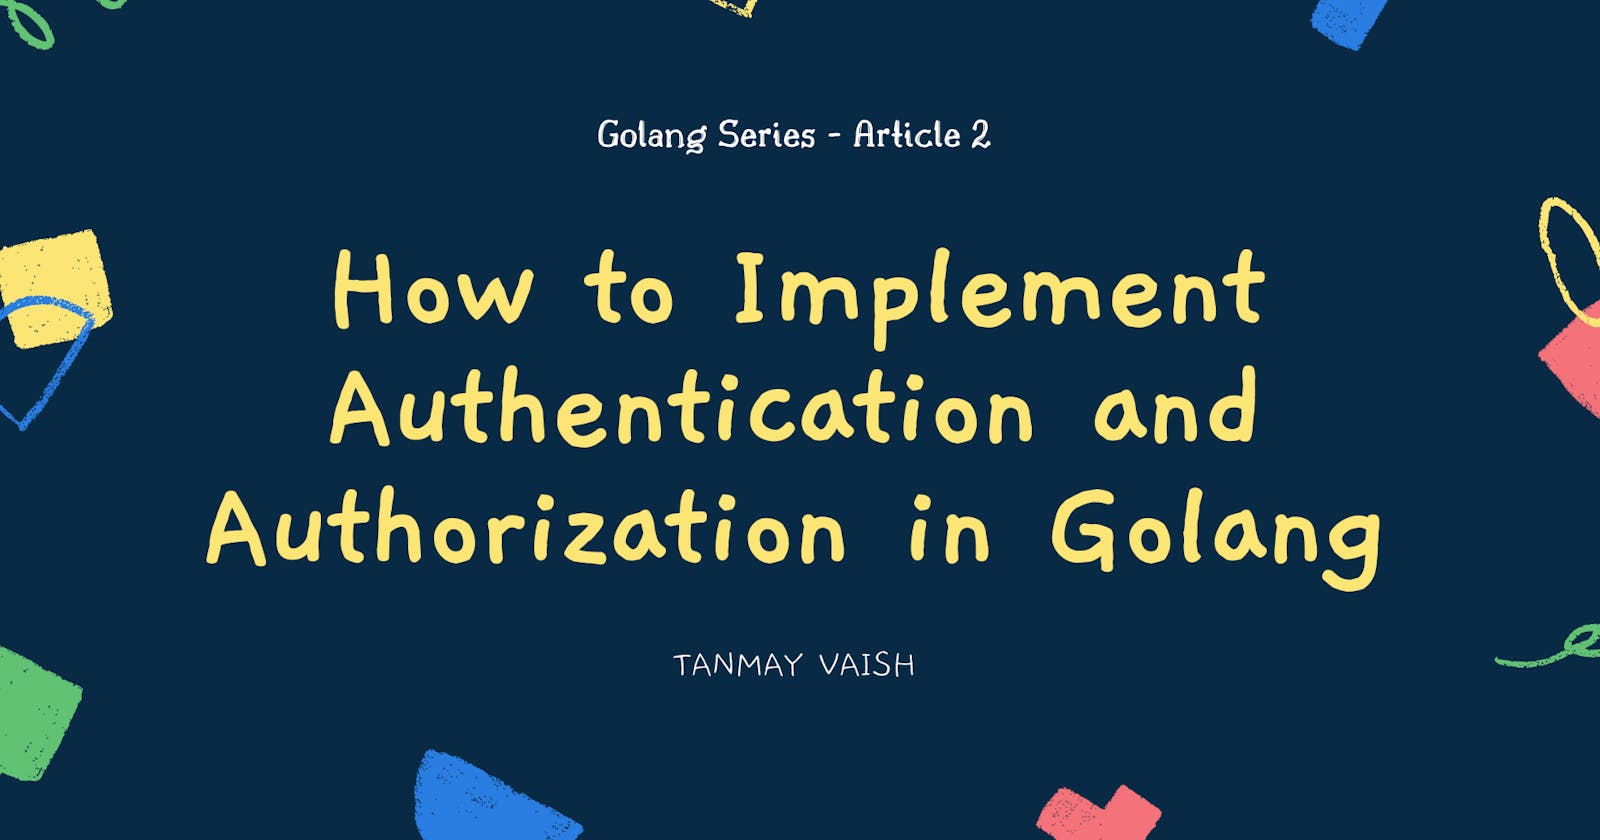 How to Implement Authentication and Authorization in Golang.